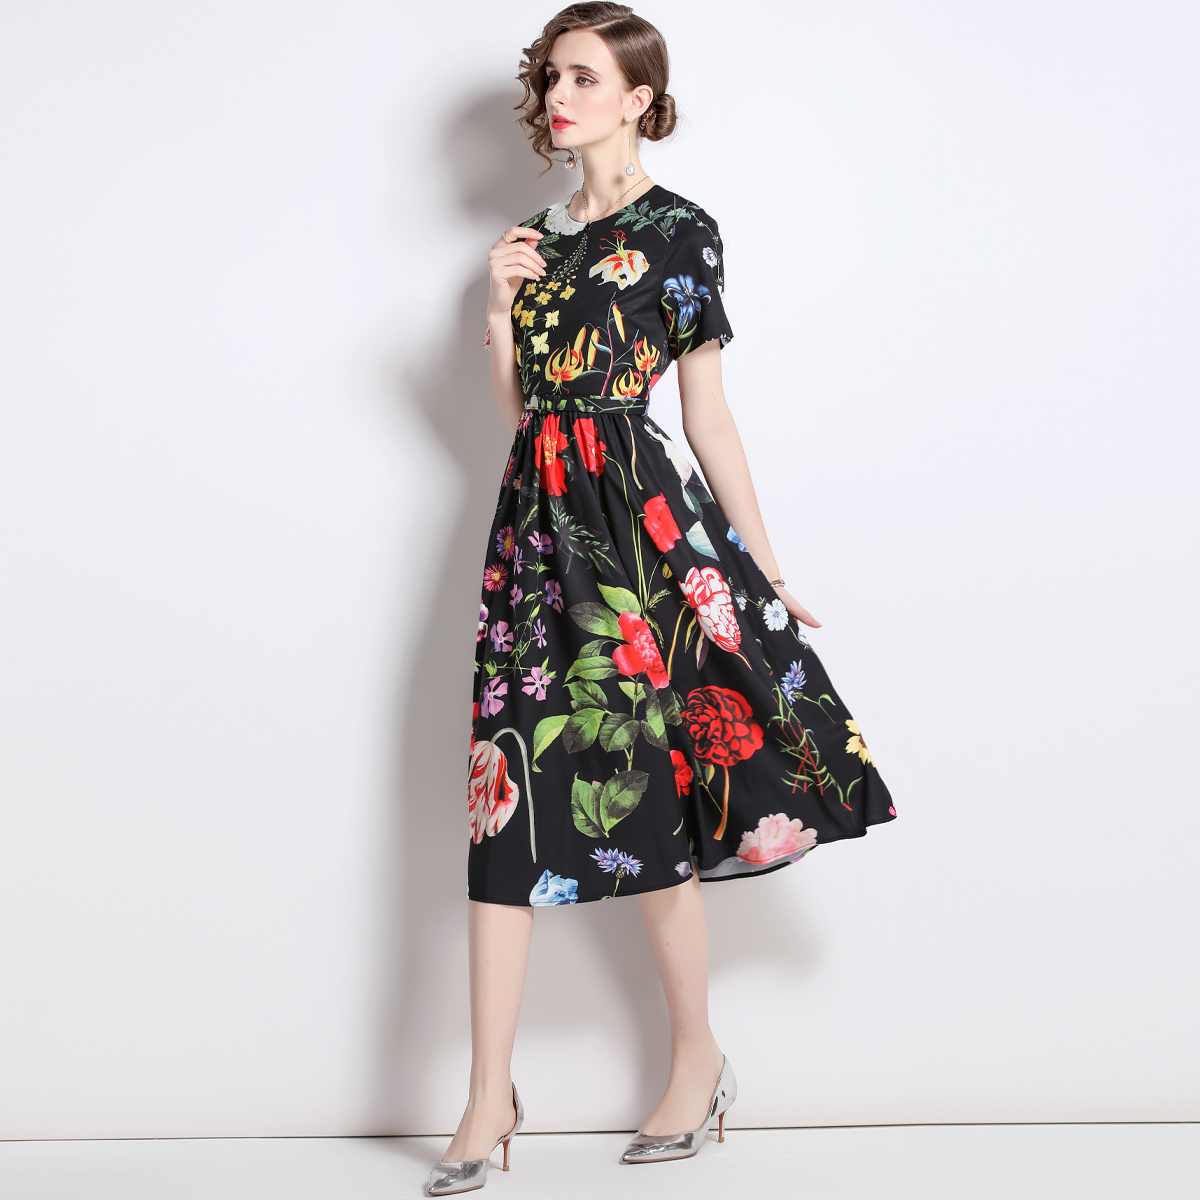 Long printing pinched waist slim retro with belt dress